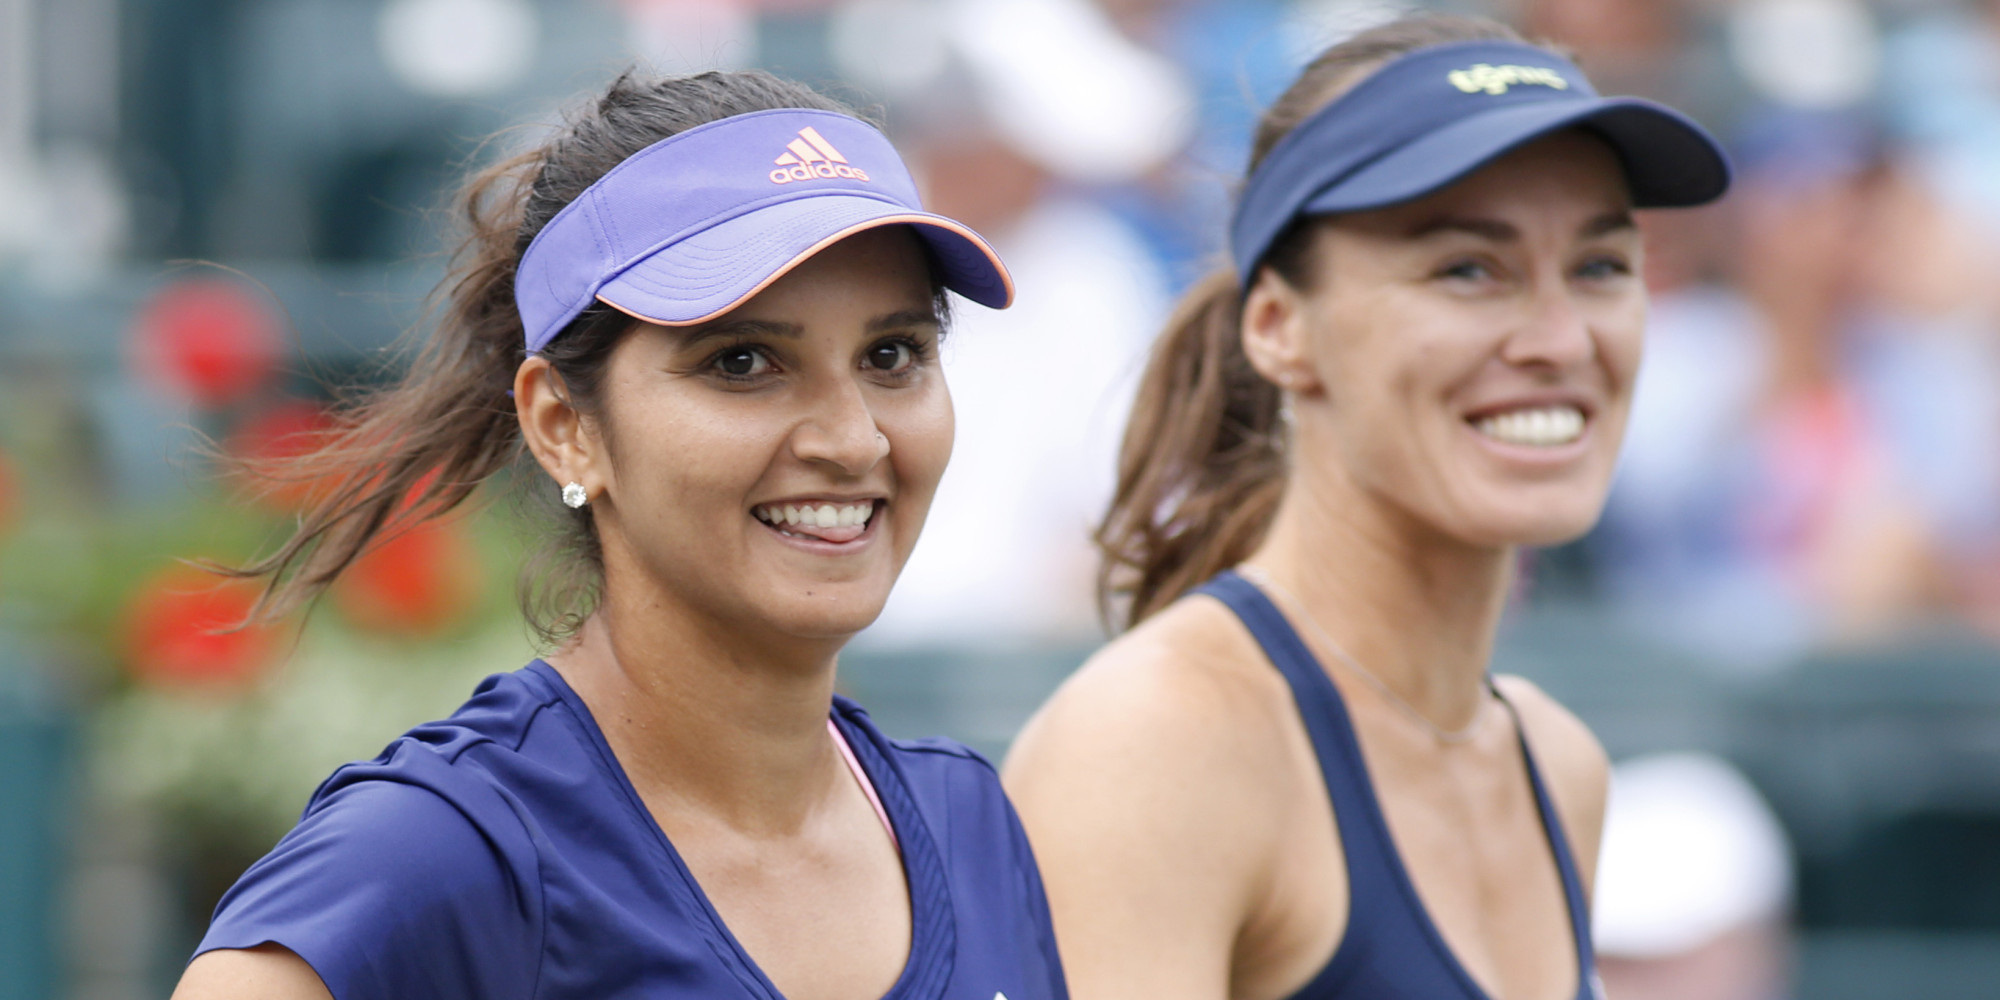 Sania Mirza and Martina Hingis Wrap Up First Round of Aussie Open